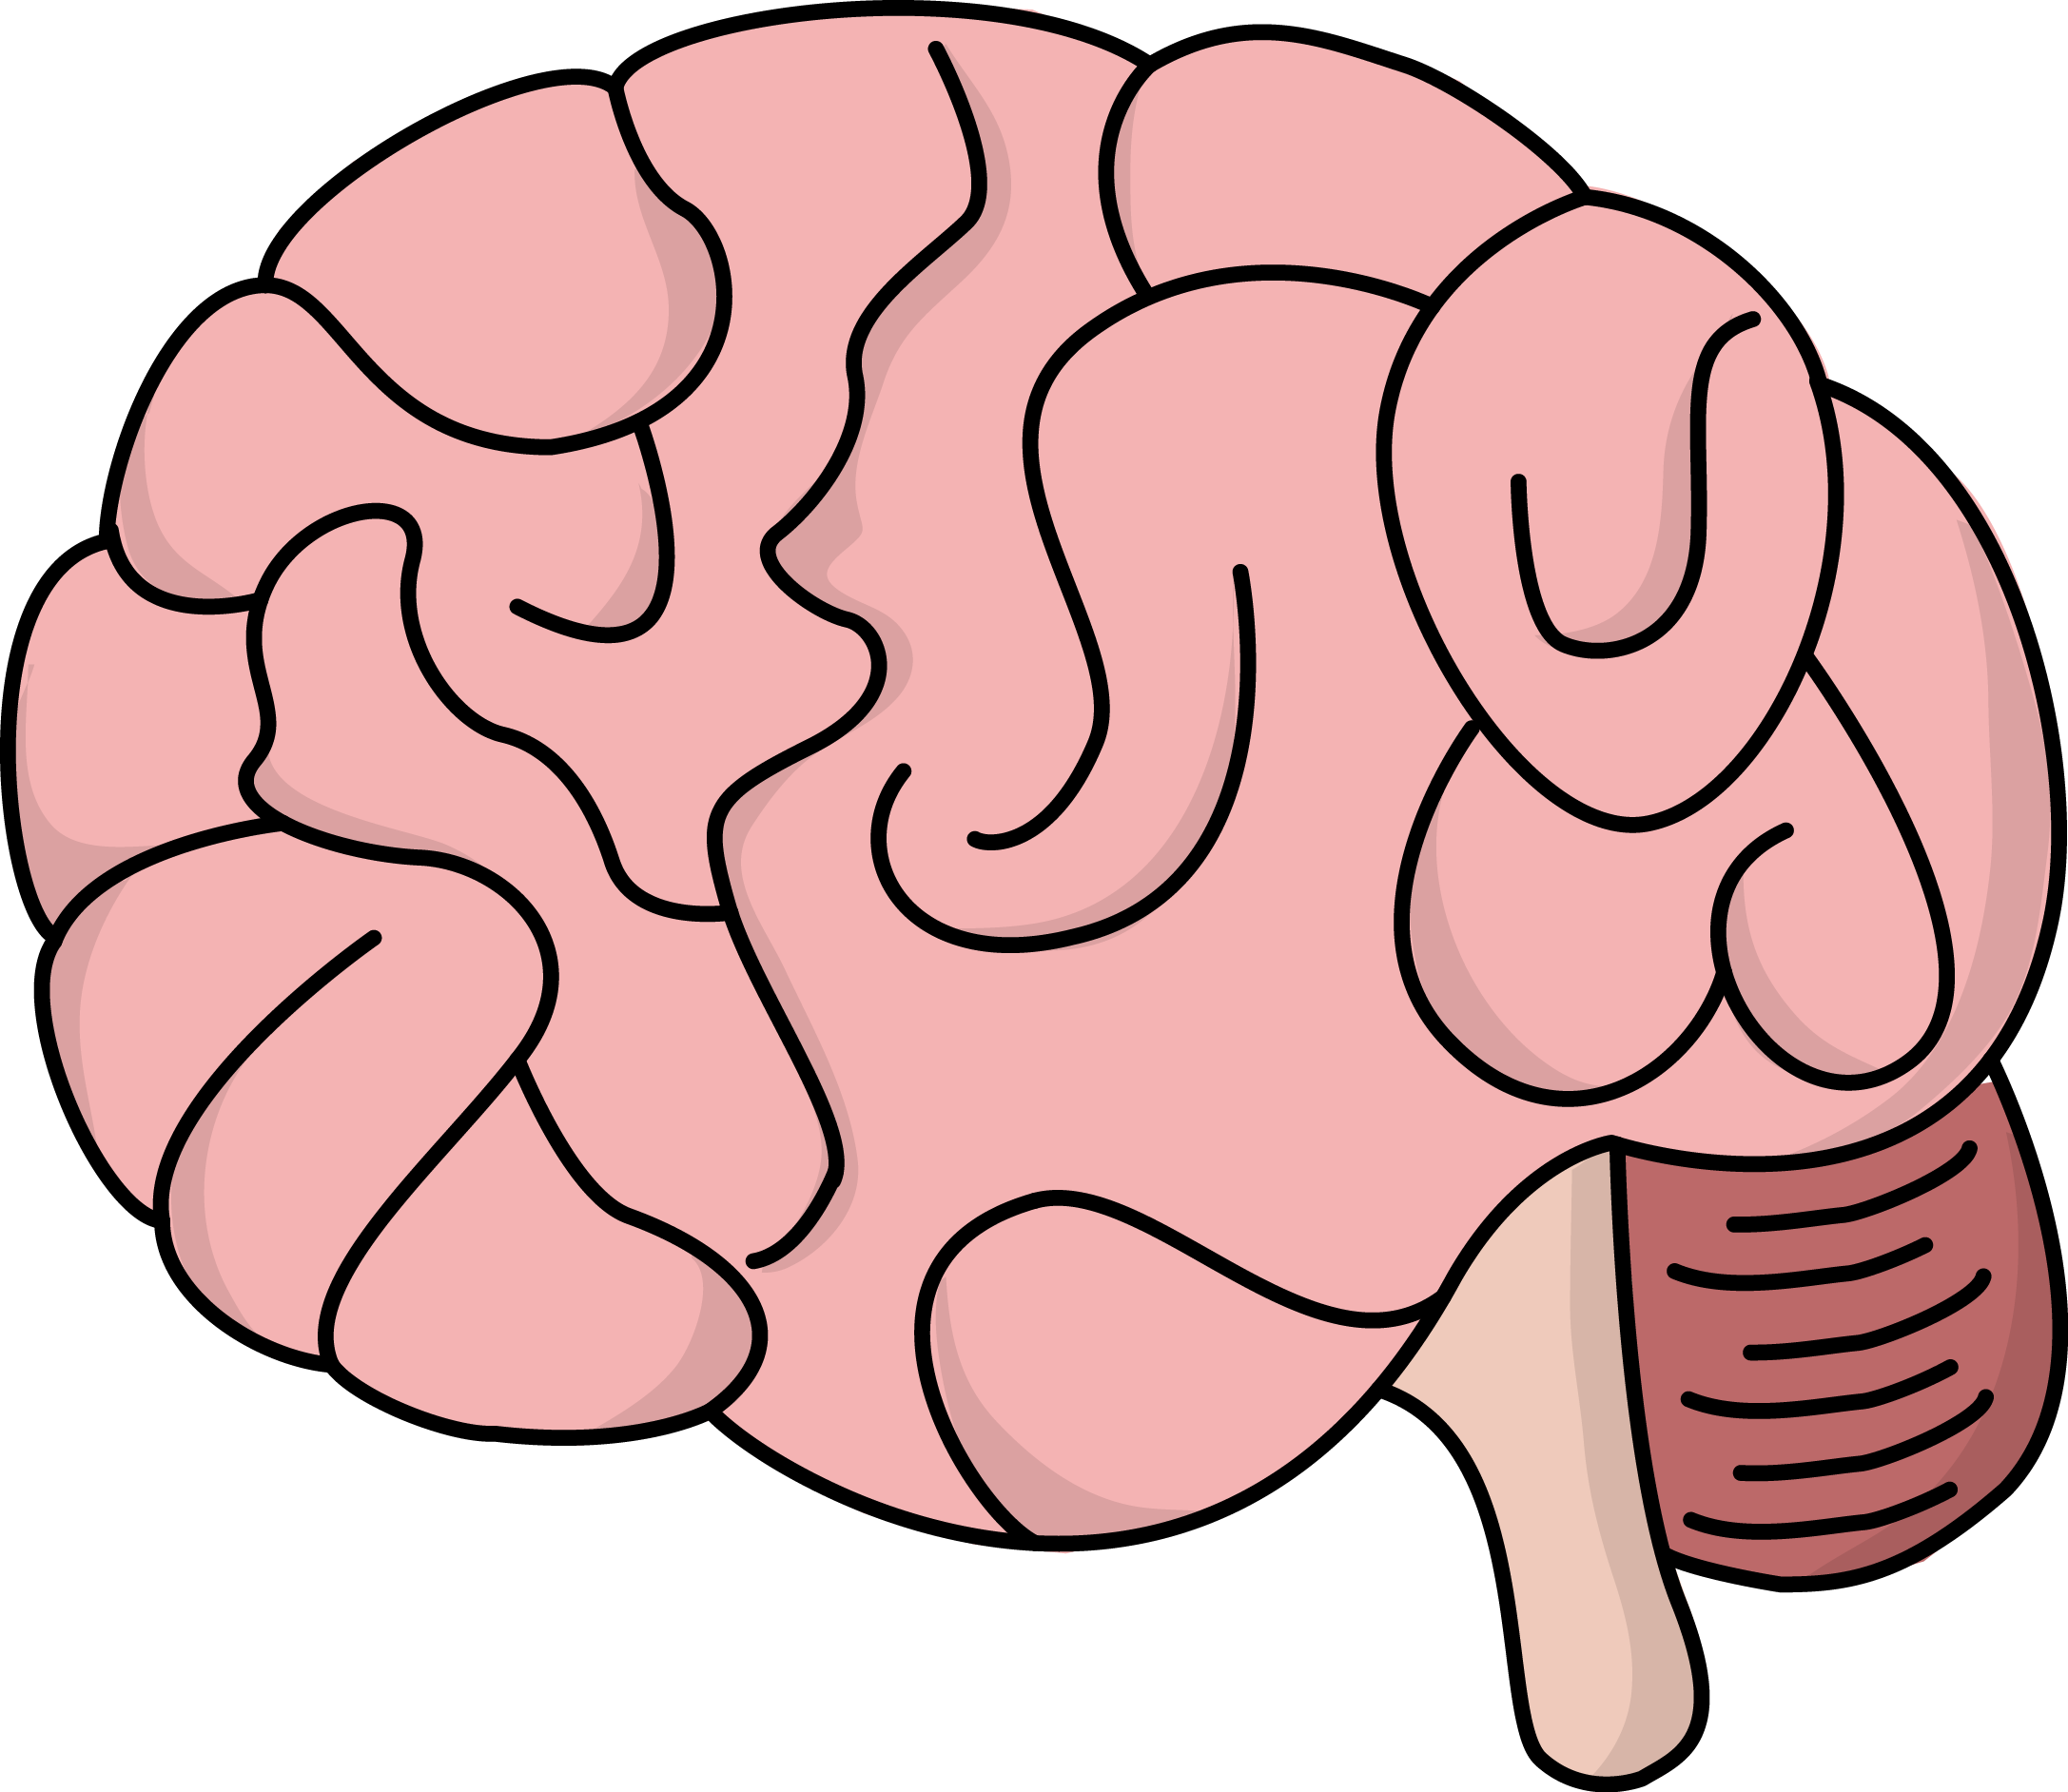 Brain Muscle Png Looking For Brain Images And Vectors Galuh Karnia458